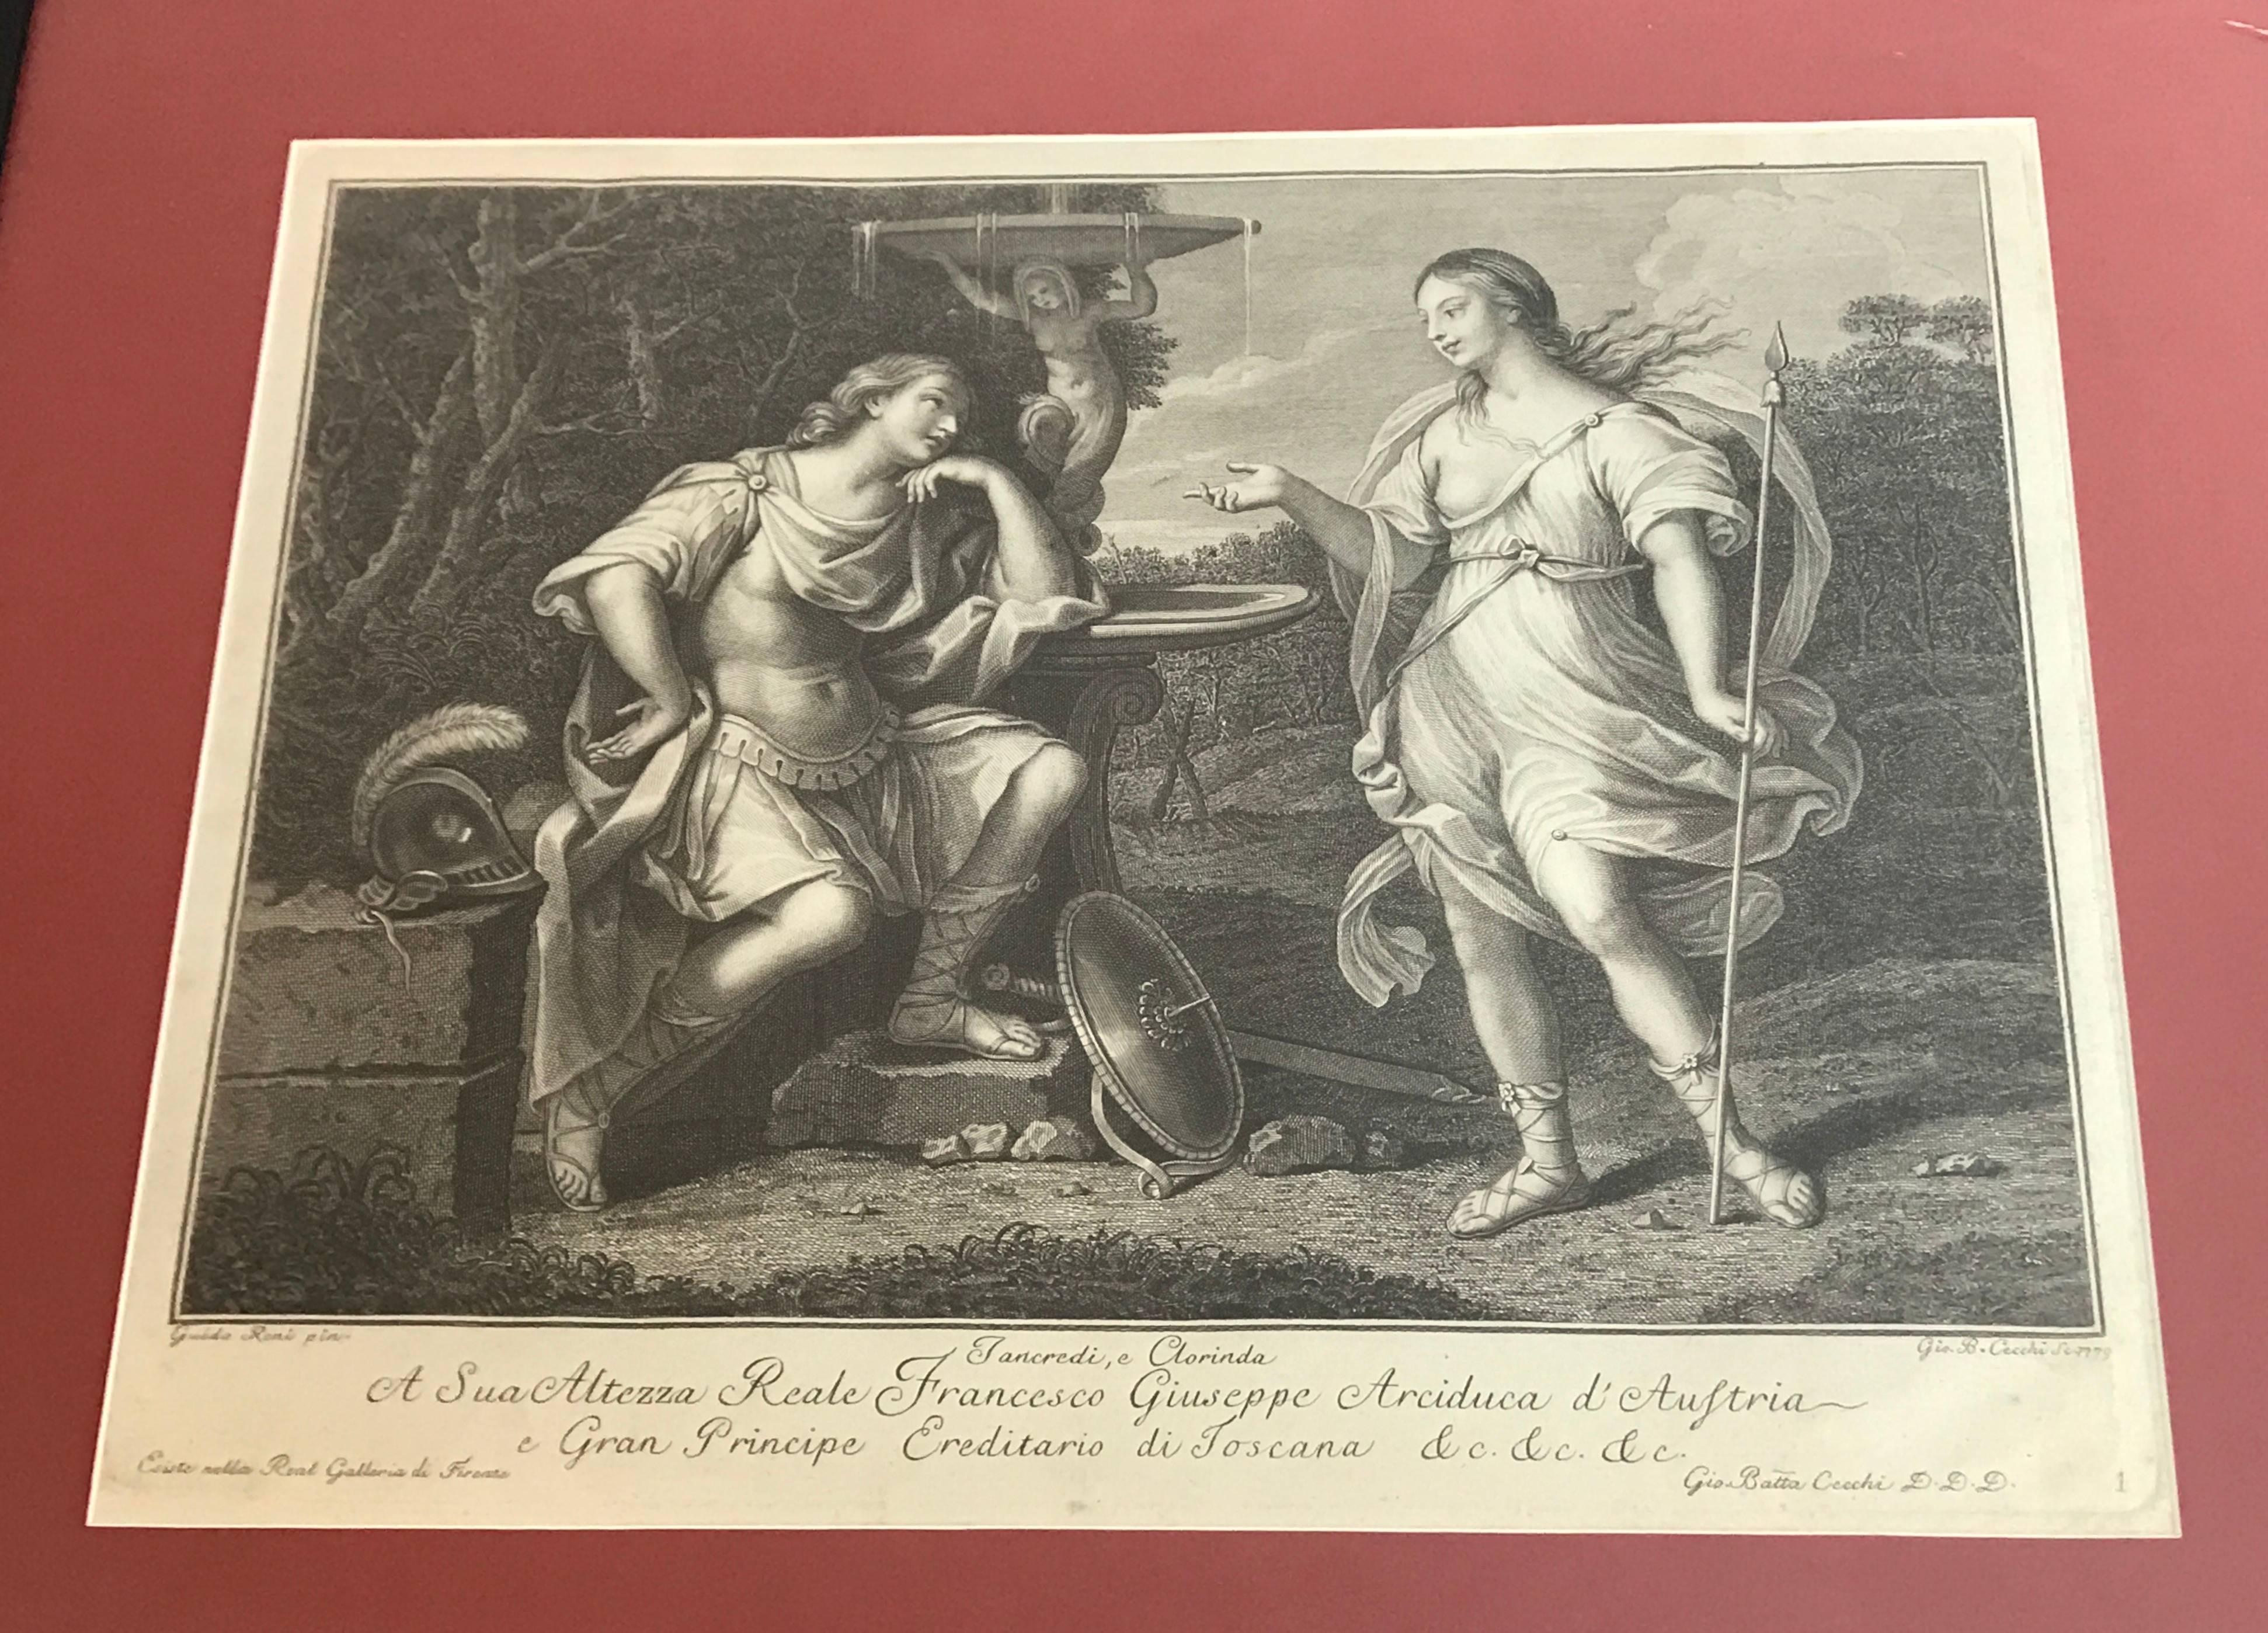 18th century engraving of tancredi, e Clorinda by Gio. B. Cecchi Sc., 1779. Custom matted and framed.